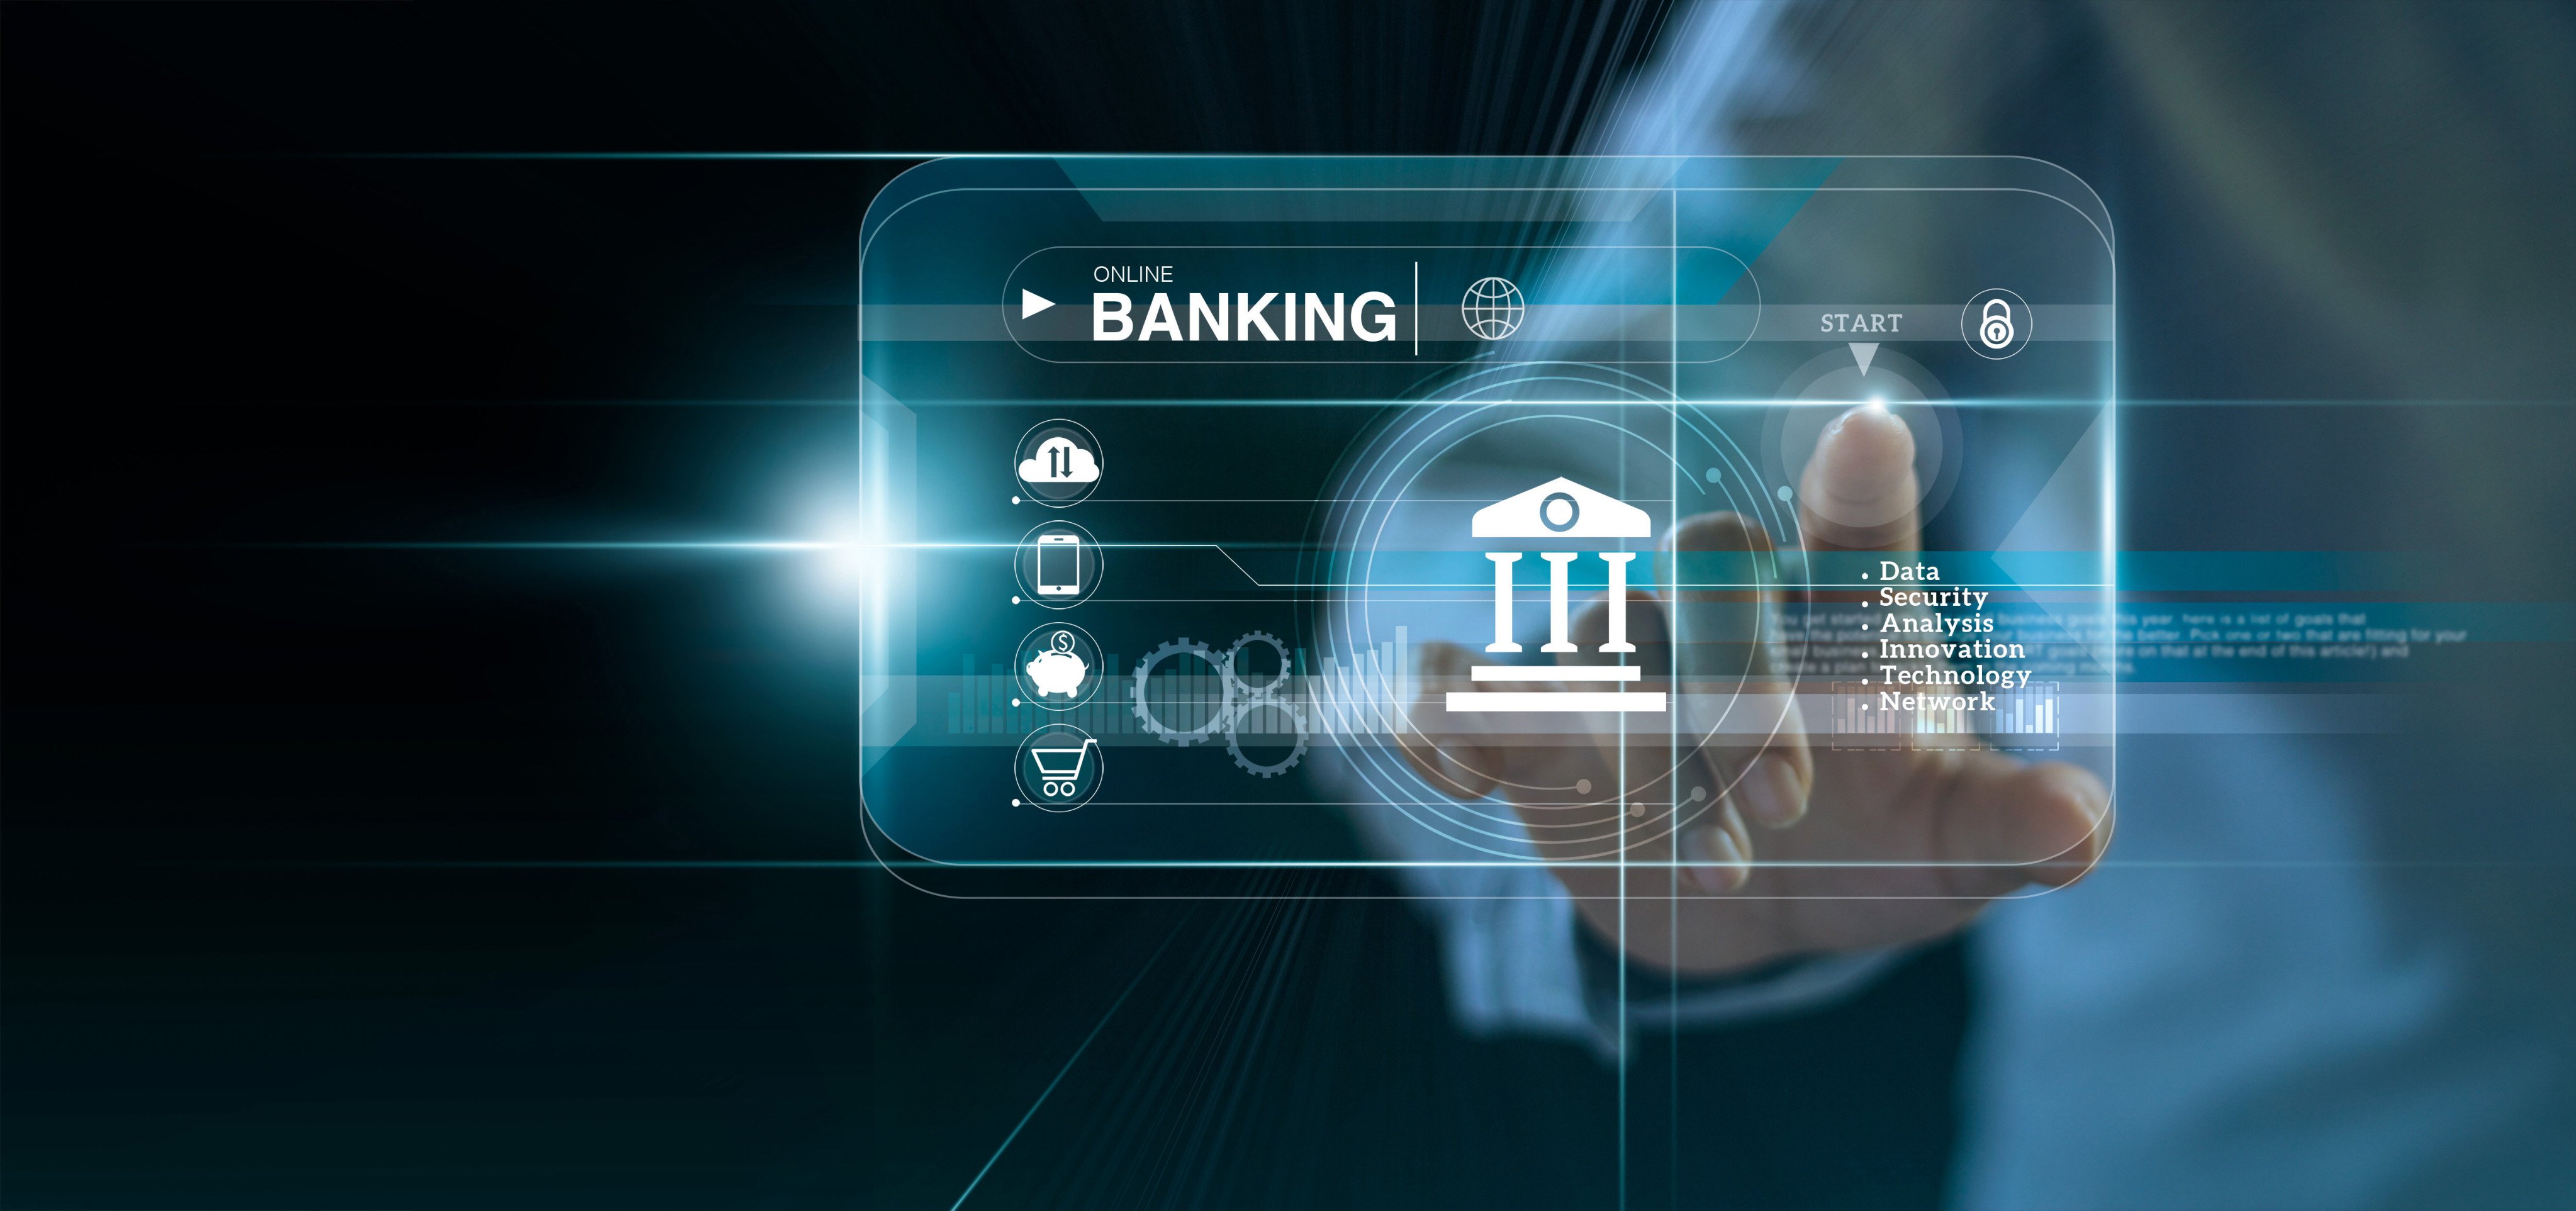 Police say they have seen a “palpable rise” in virtual bank accounts being used for money laundering. Photo: Shutterstock